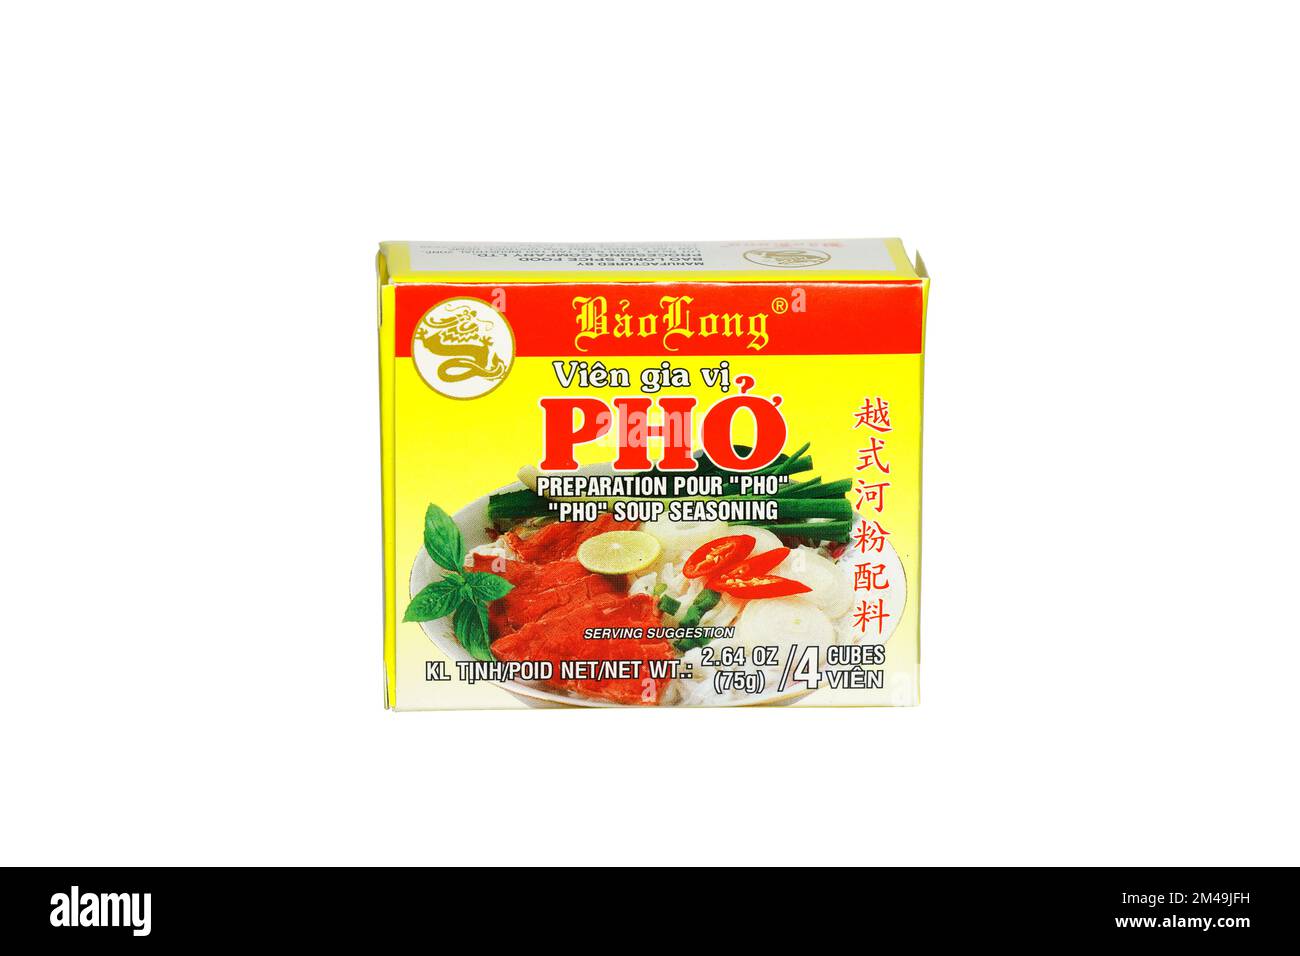 A box of Bao Long Pho soup seasoning bouillon cubes isolated on a white background. cutout image for illustration and editorial use. Stock Photo